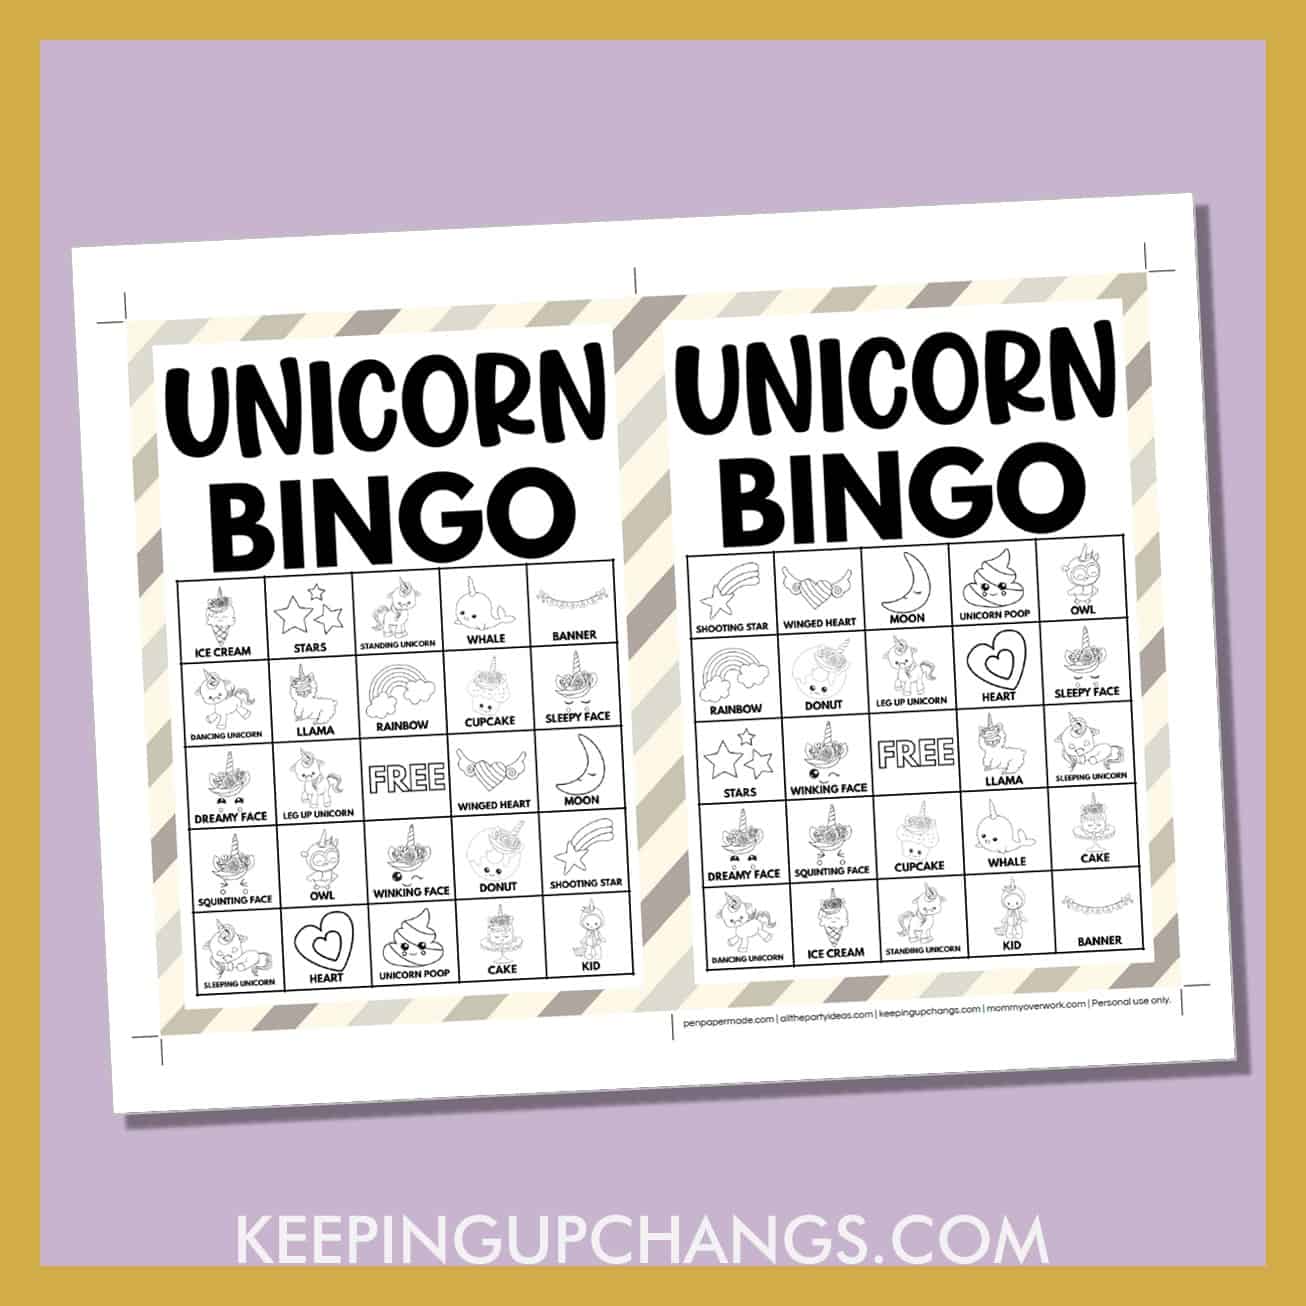 free unicorn bingo card 5x5 5x7 game boards with black, white images and text words.